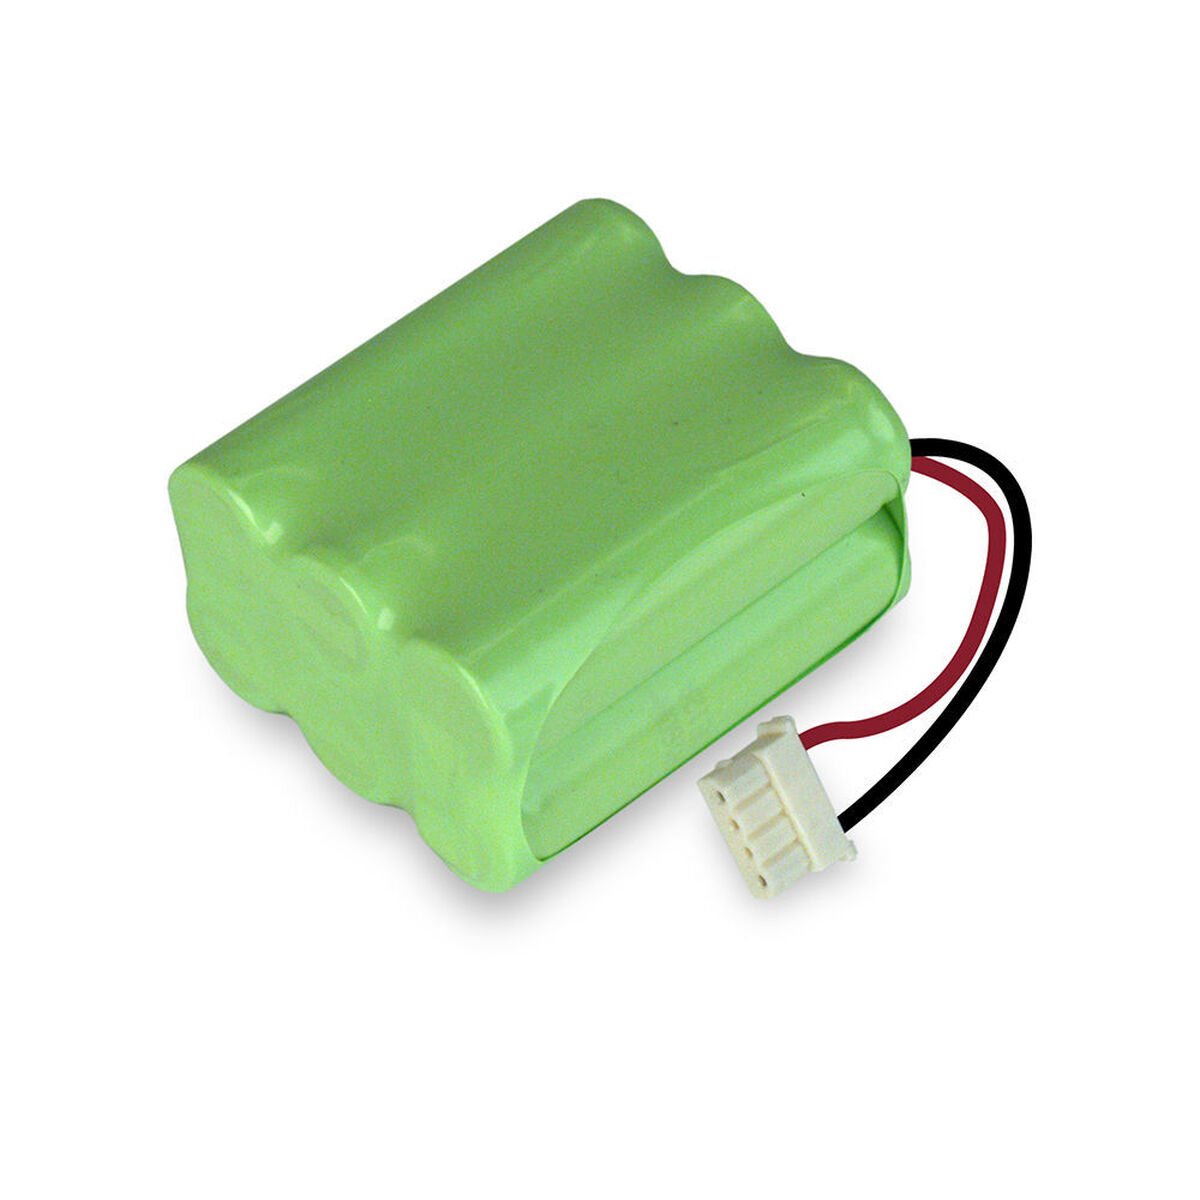 1500 mAh NiMH Battery For Braava 320 And Mint 4200, , large image number 0